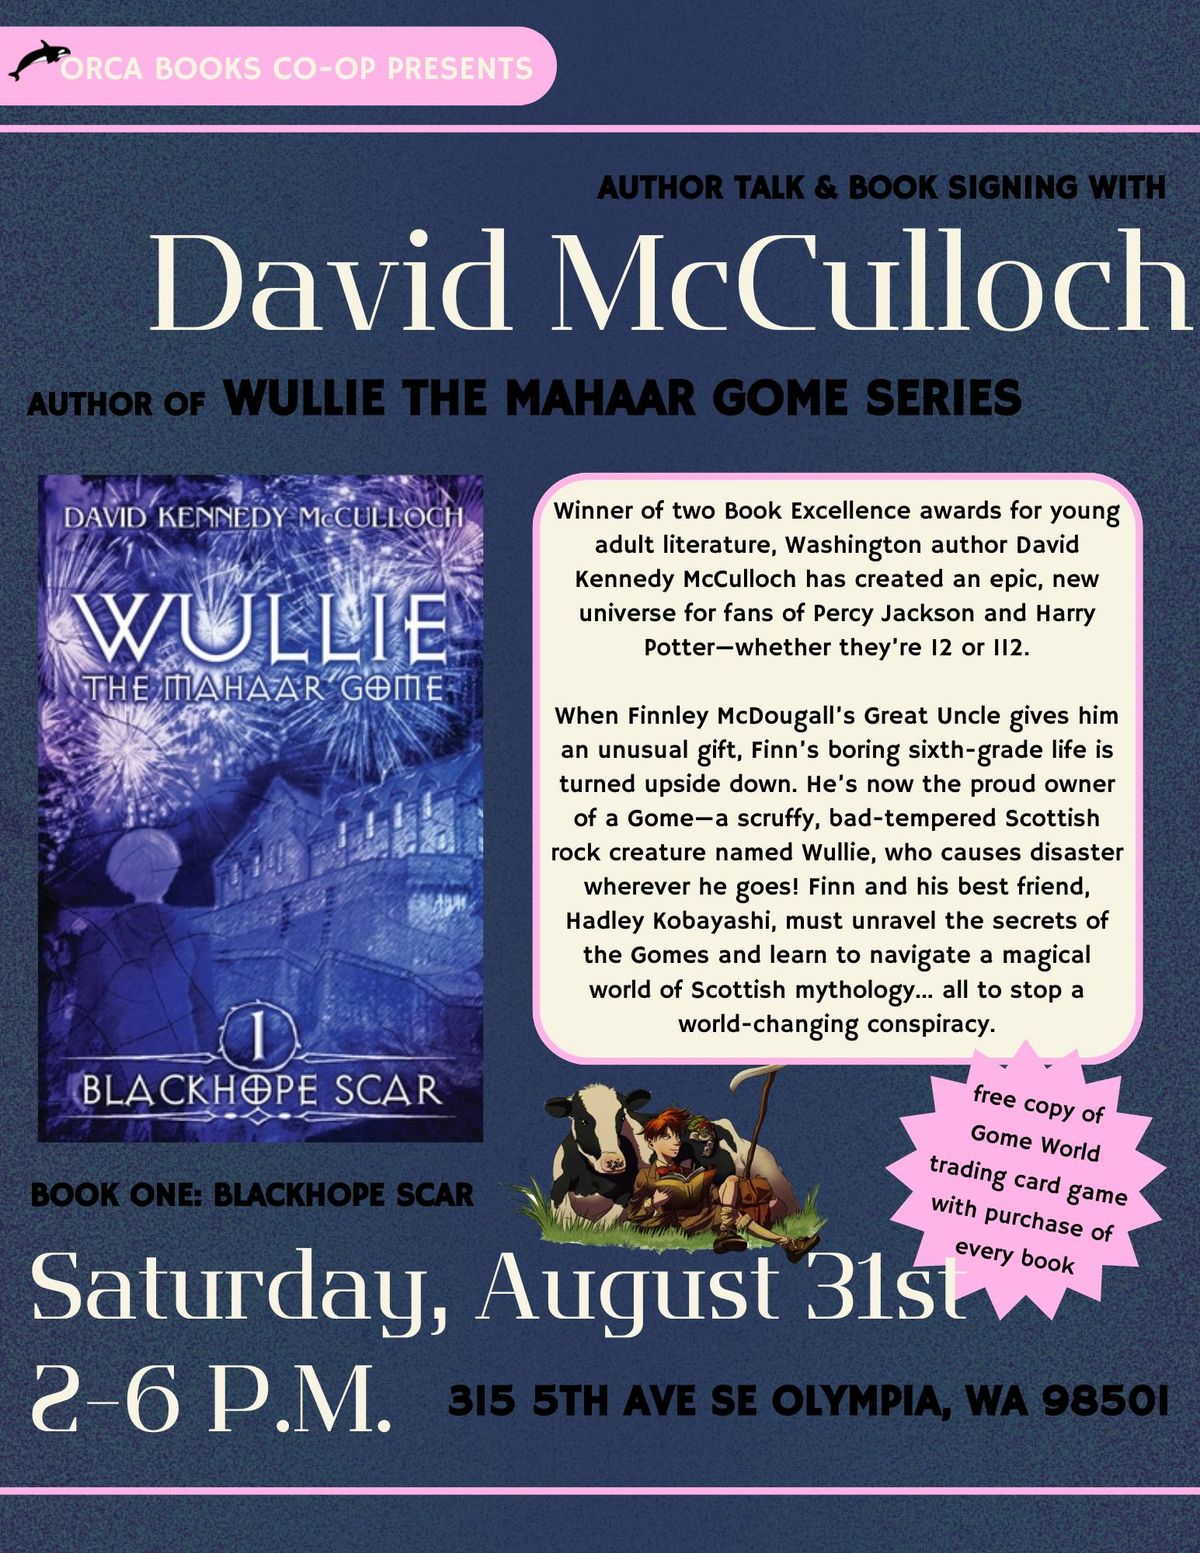 Author Talk and Signing with David McCulloch